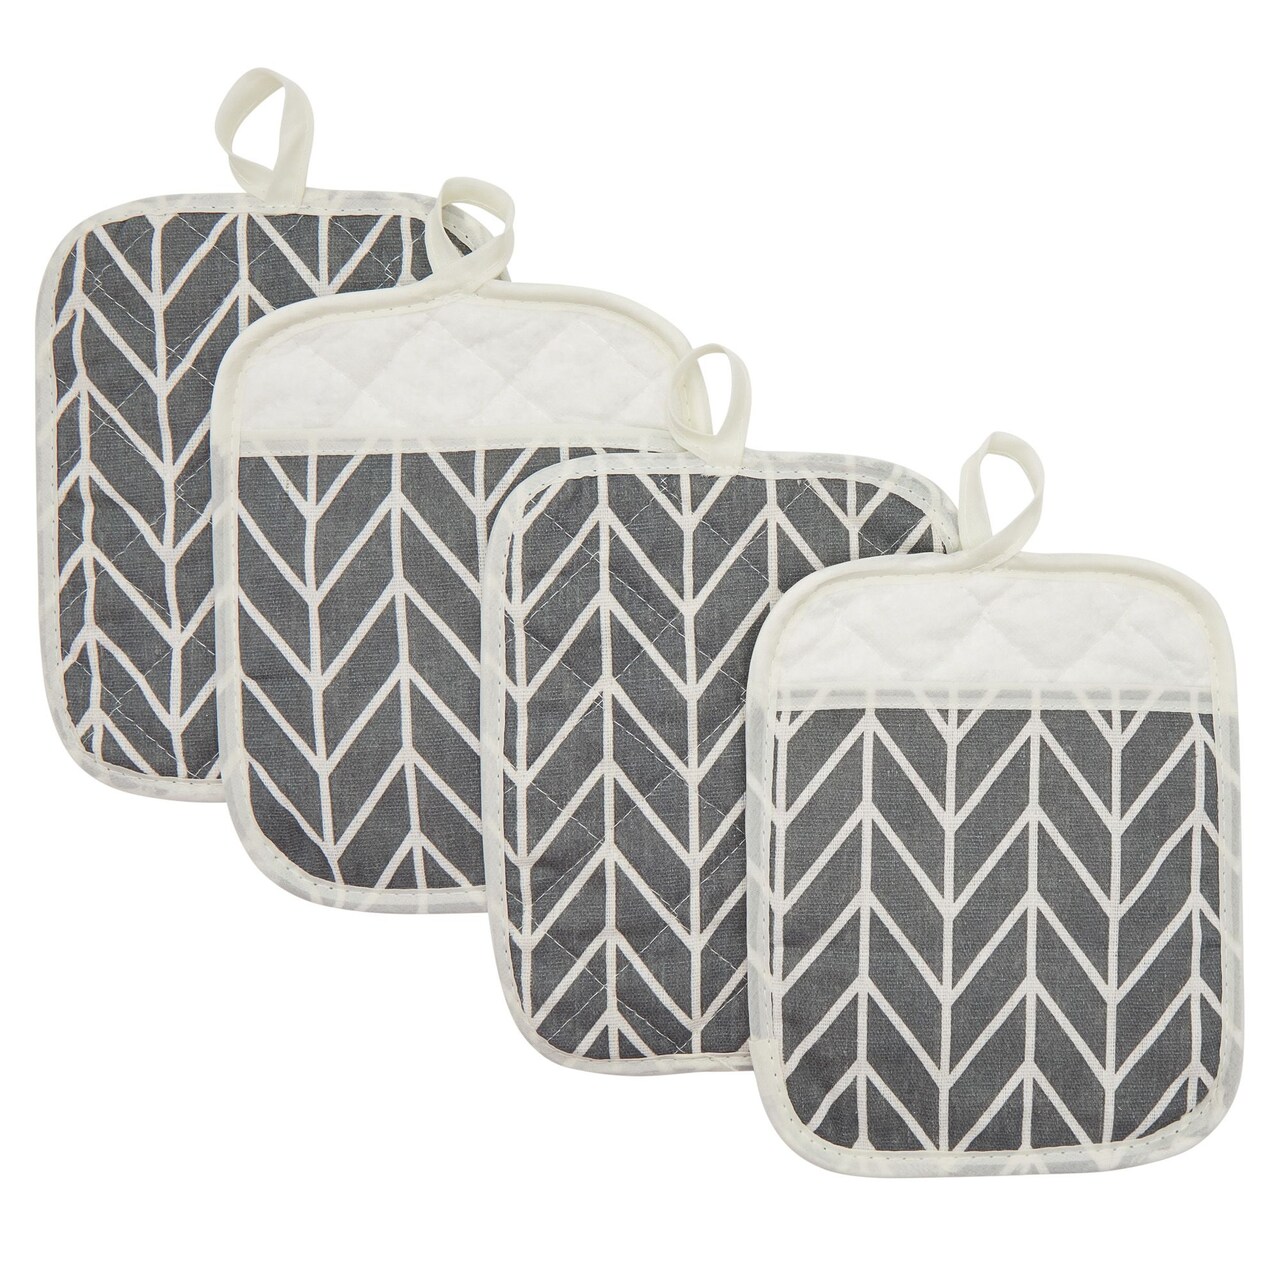 4 Pack Gray Hot Pads, Oven Pot Holders for Farmhouse Kitchen Decor and Accessories, Heat Resistant, 7 x 8.5 in.